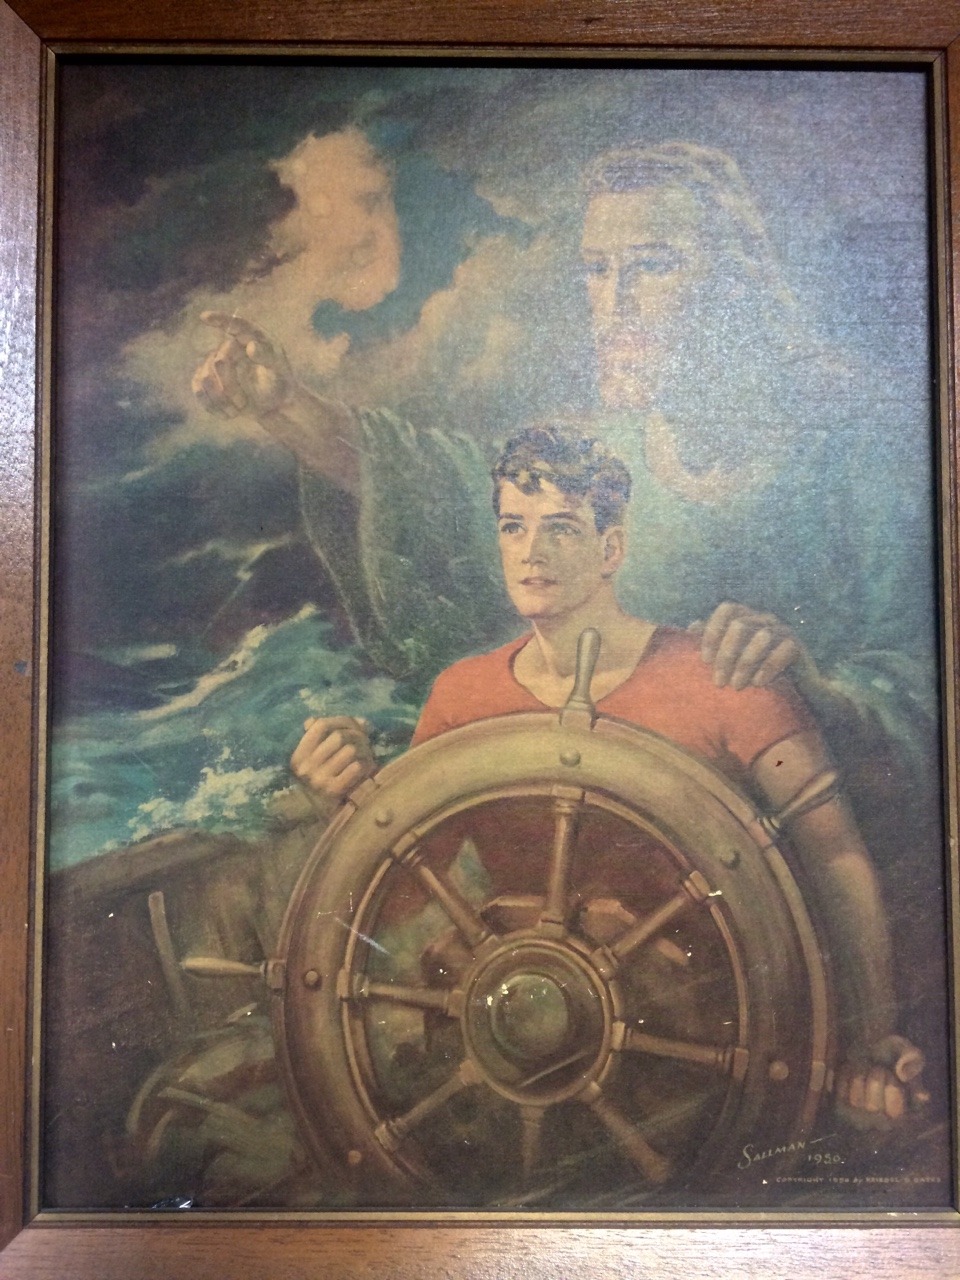 Warner Sallman CHRIST OUR PILOT 8x10 Print Jesus Young Man on Boat in Storm